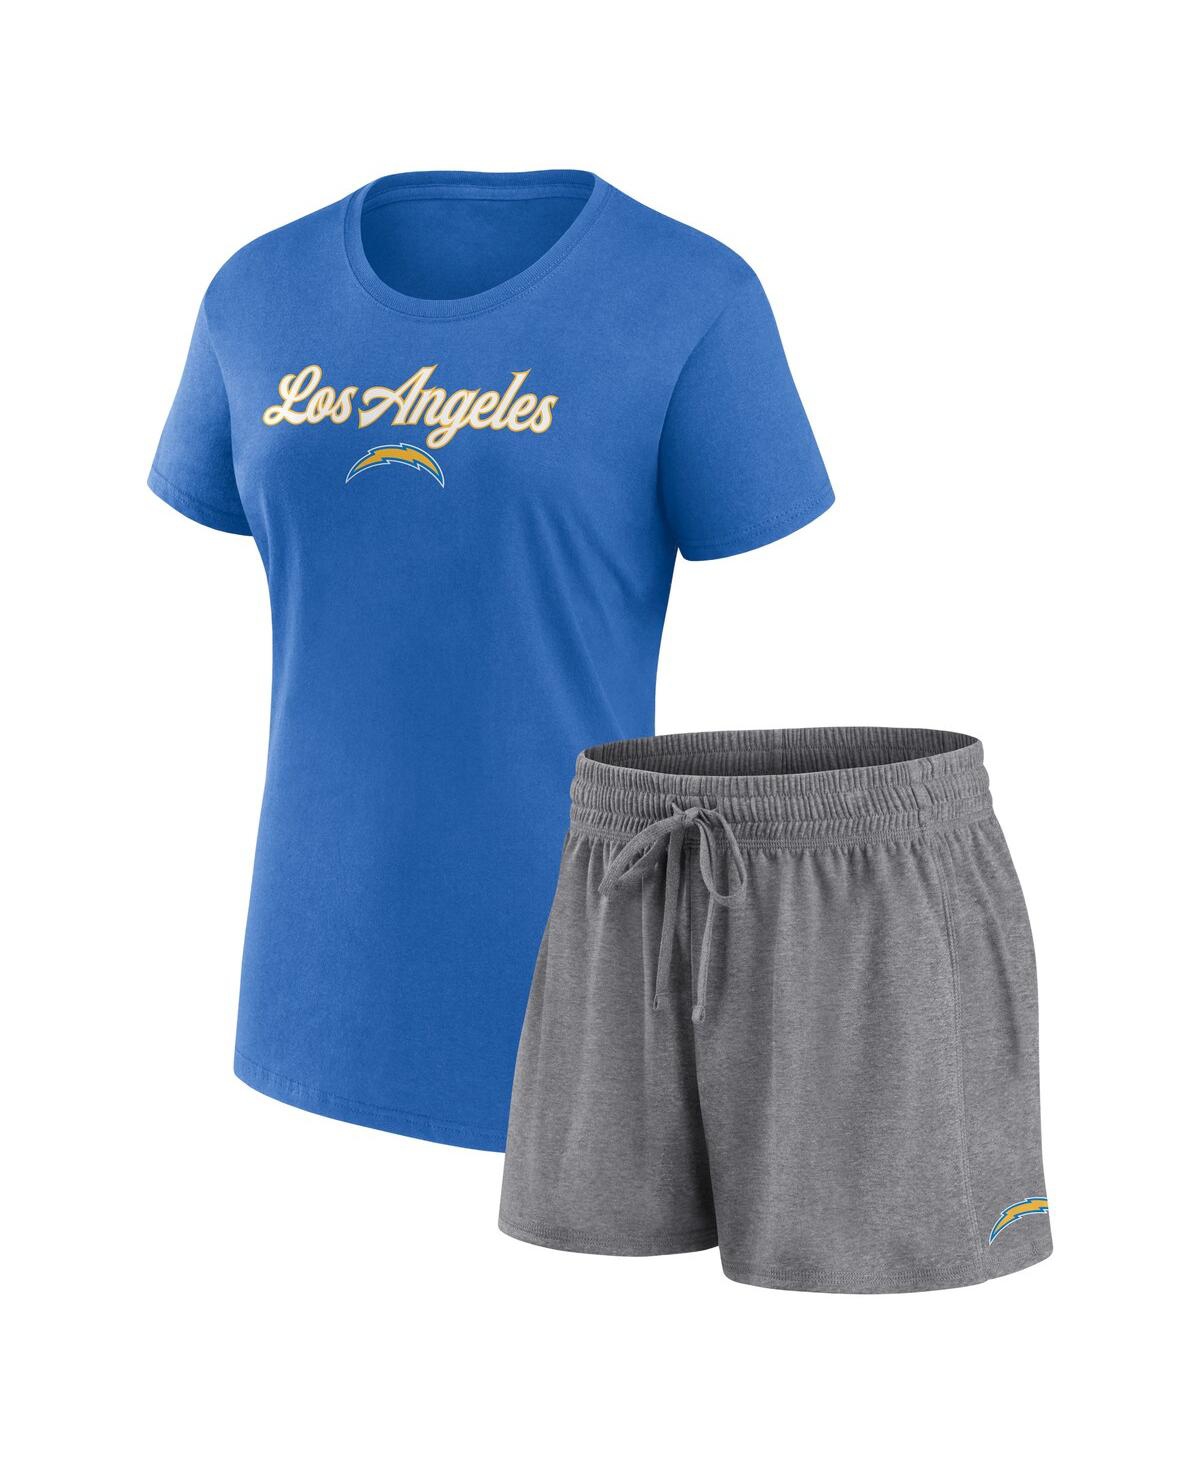 Women's Fanatics Powder Blue, Heather Charcoal Los Angeles Chargers Script T-shirt and Shorts Lounge Set - Powder Blue, Heather Charcoal